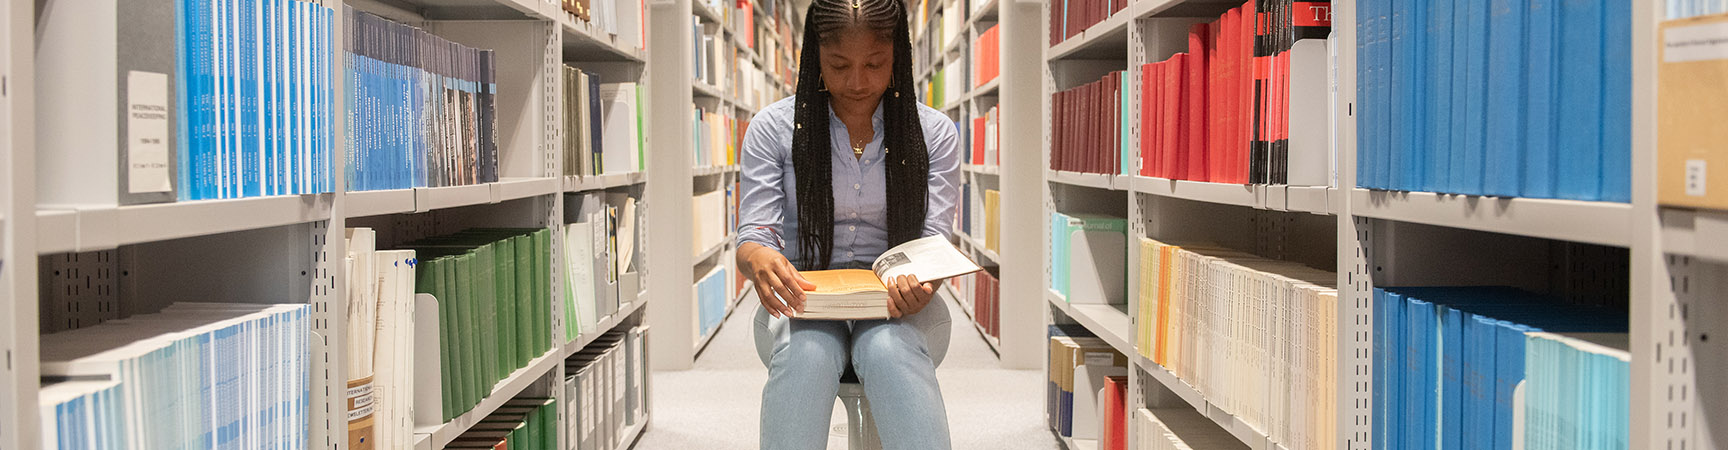 A woman sitting on a stool between bookshelves reading a book